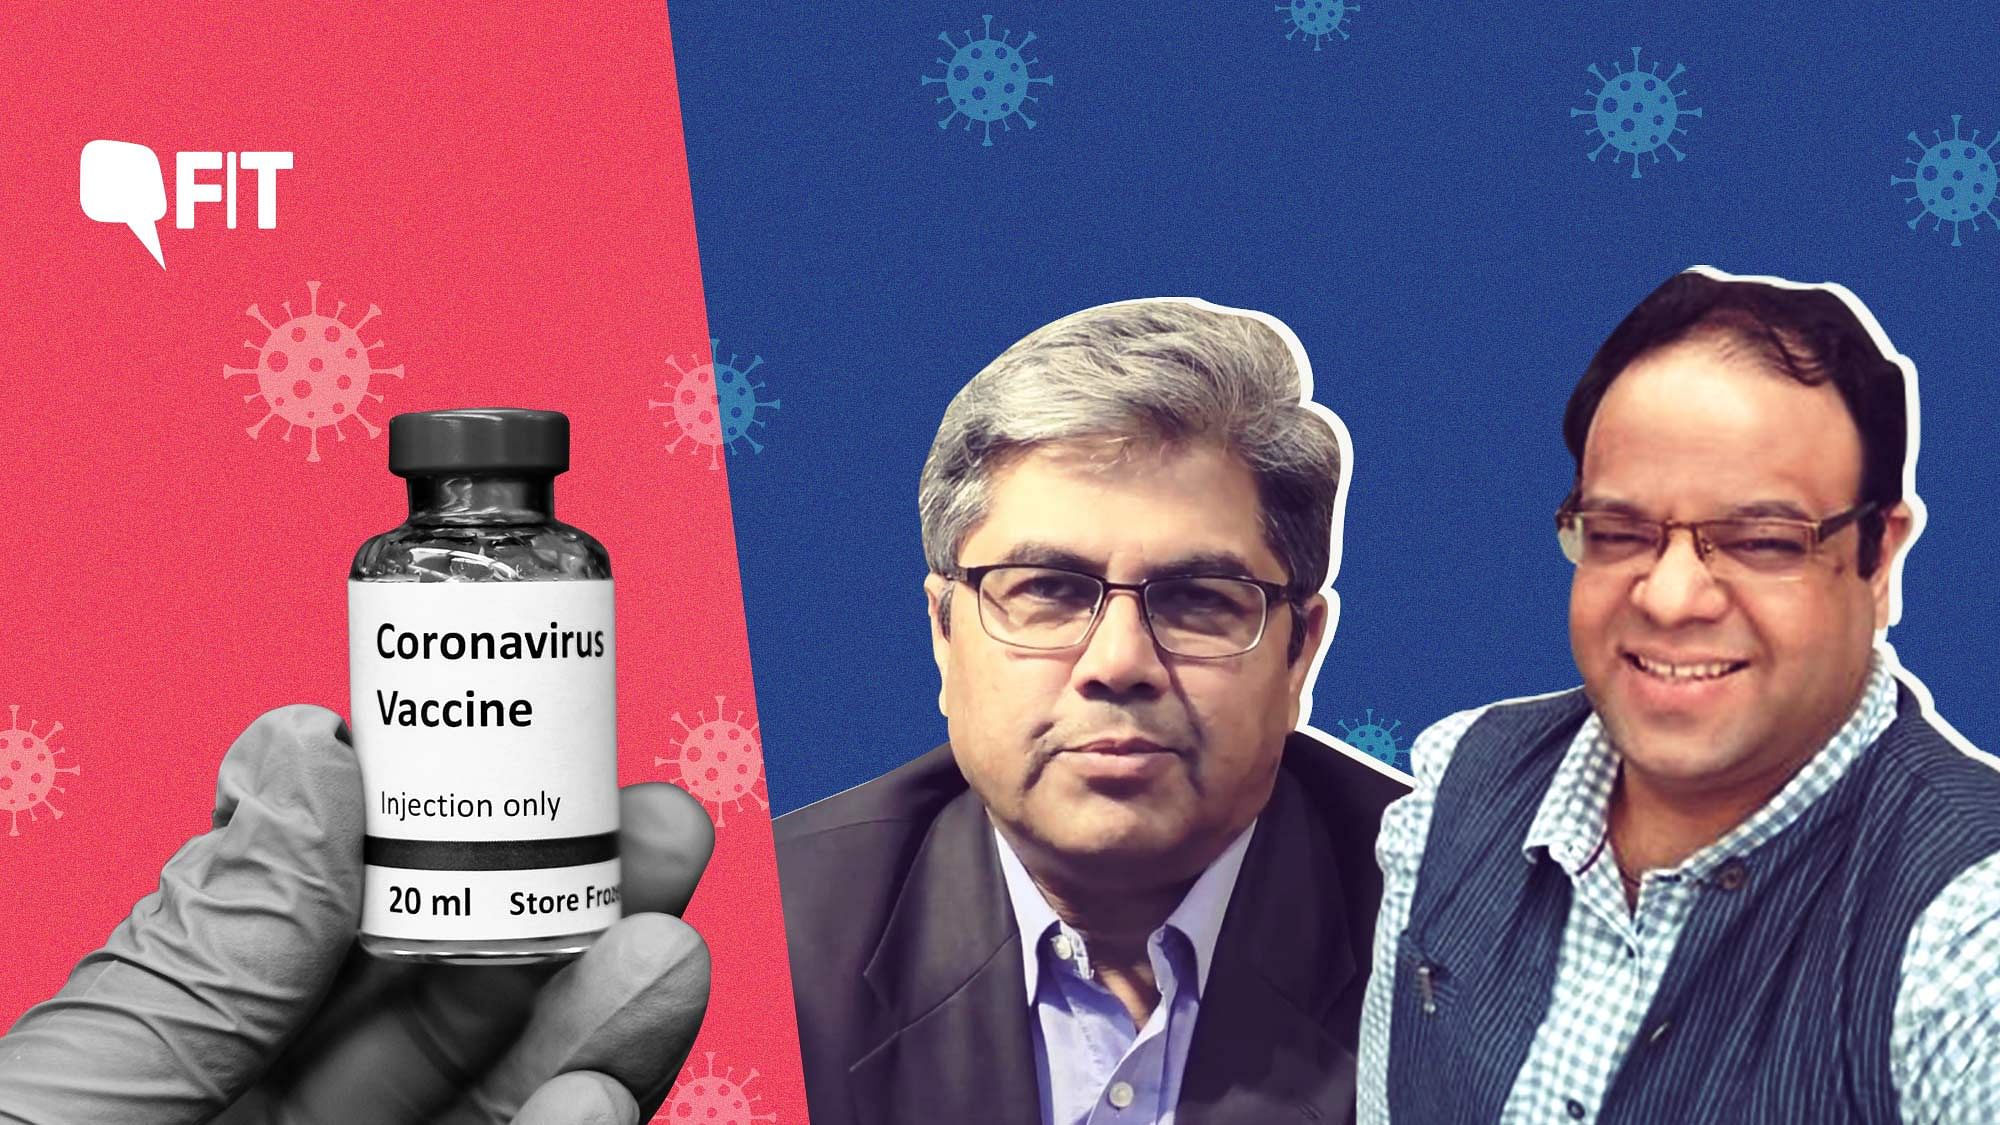 Does India have a vaccine distribution plan? Why have the details not been shared yet?